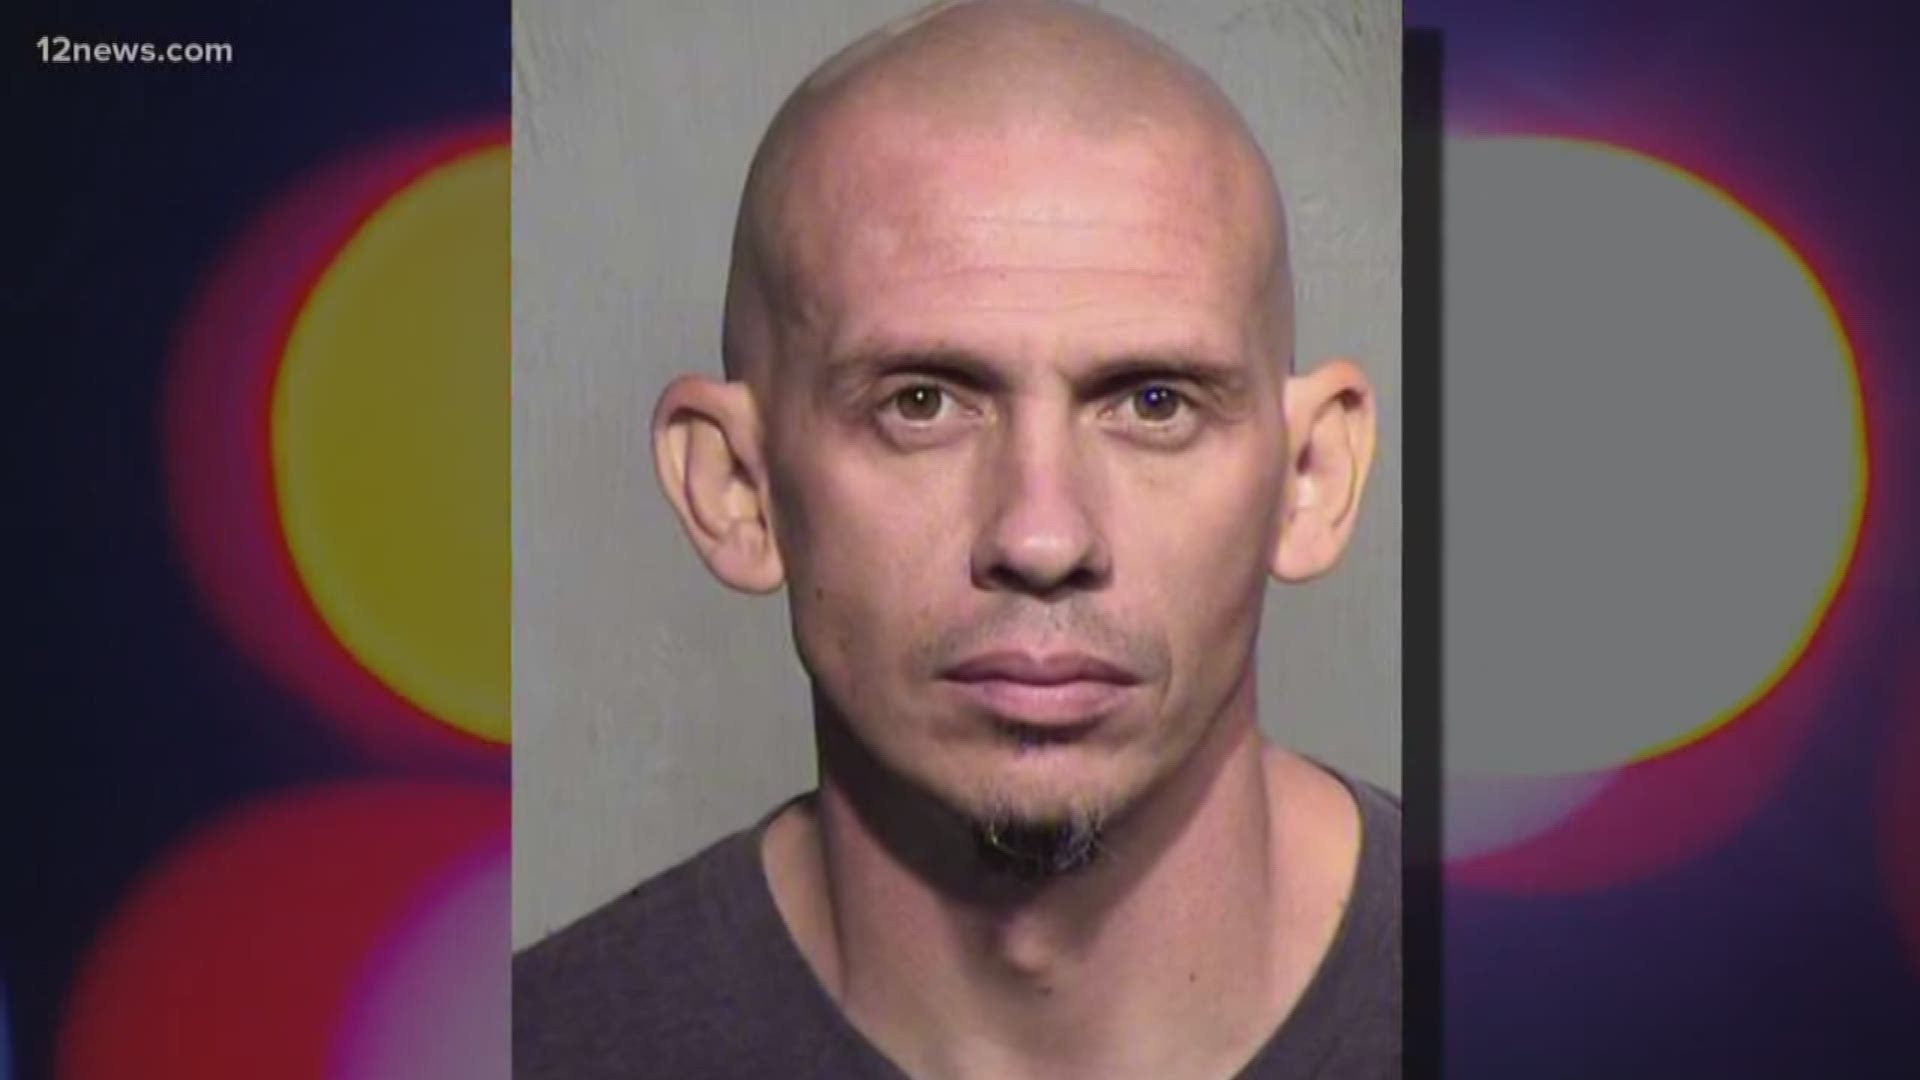 Man allegedly impregnated at least 1 of girlfriends teen daughters, MCSO says 12news